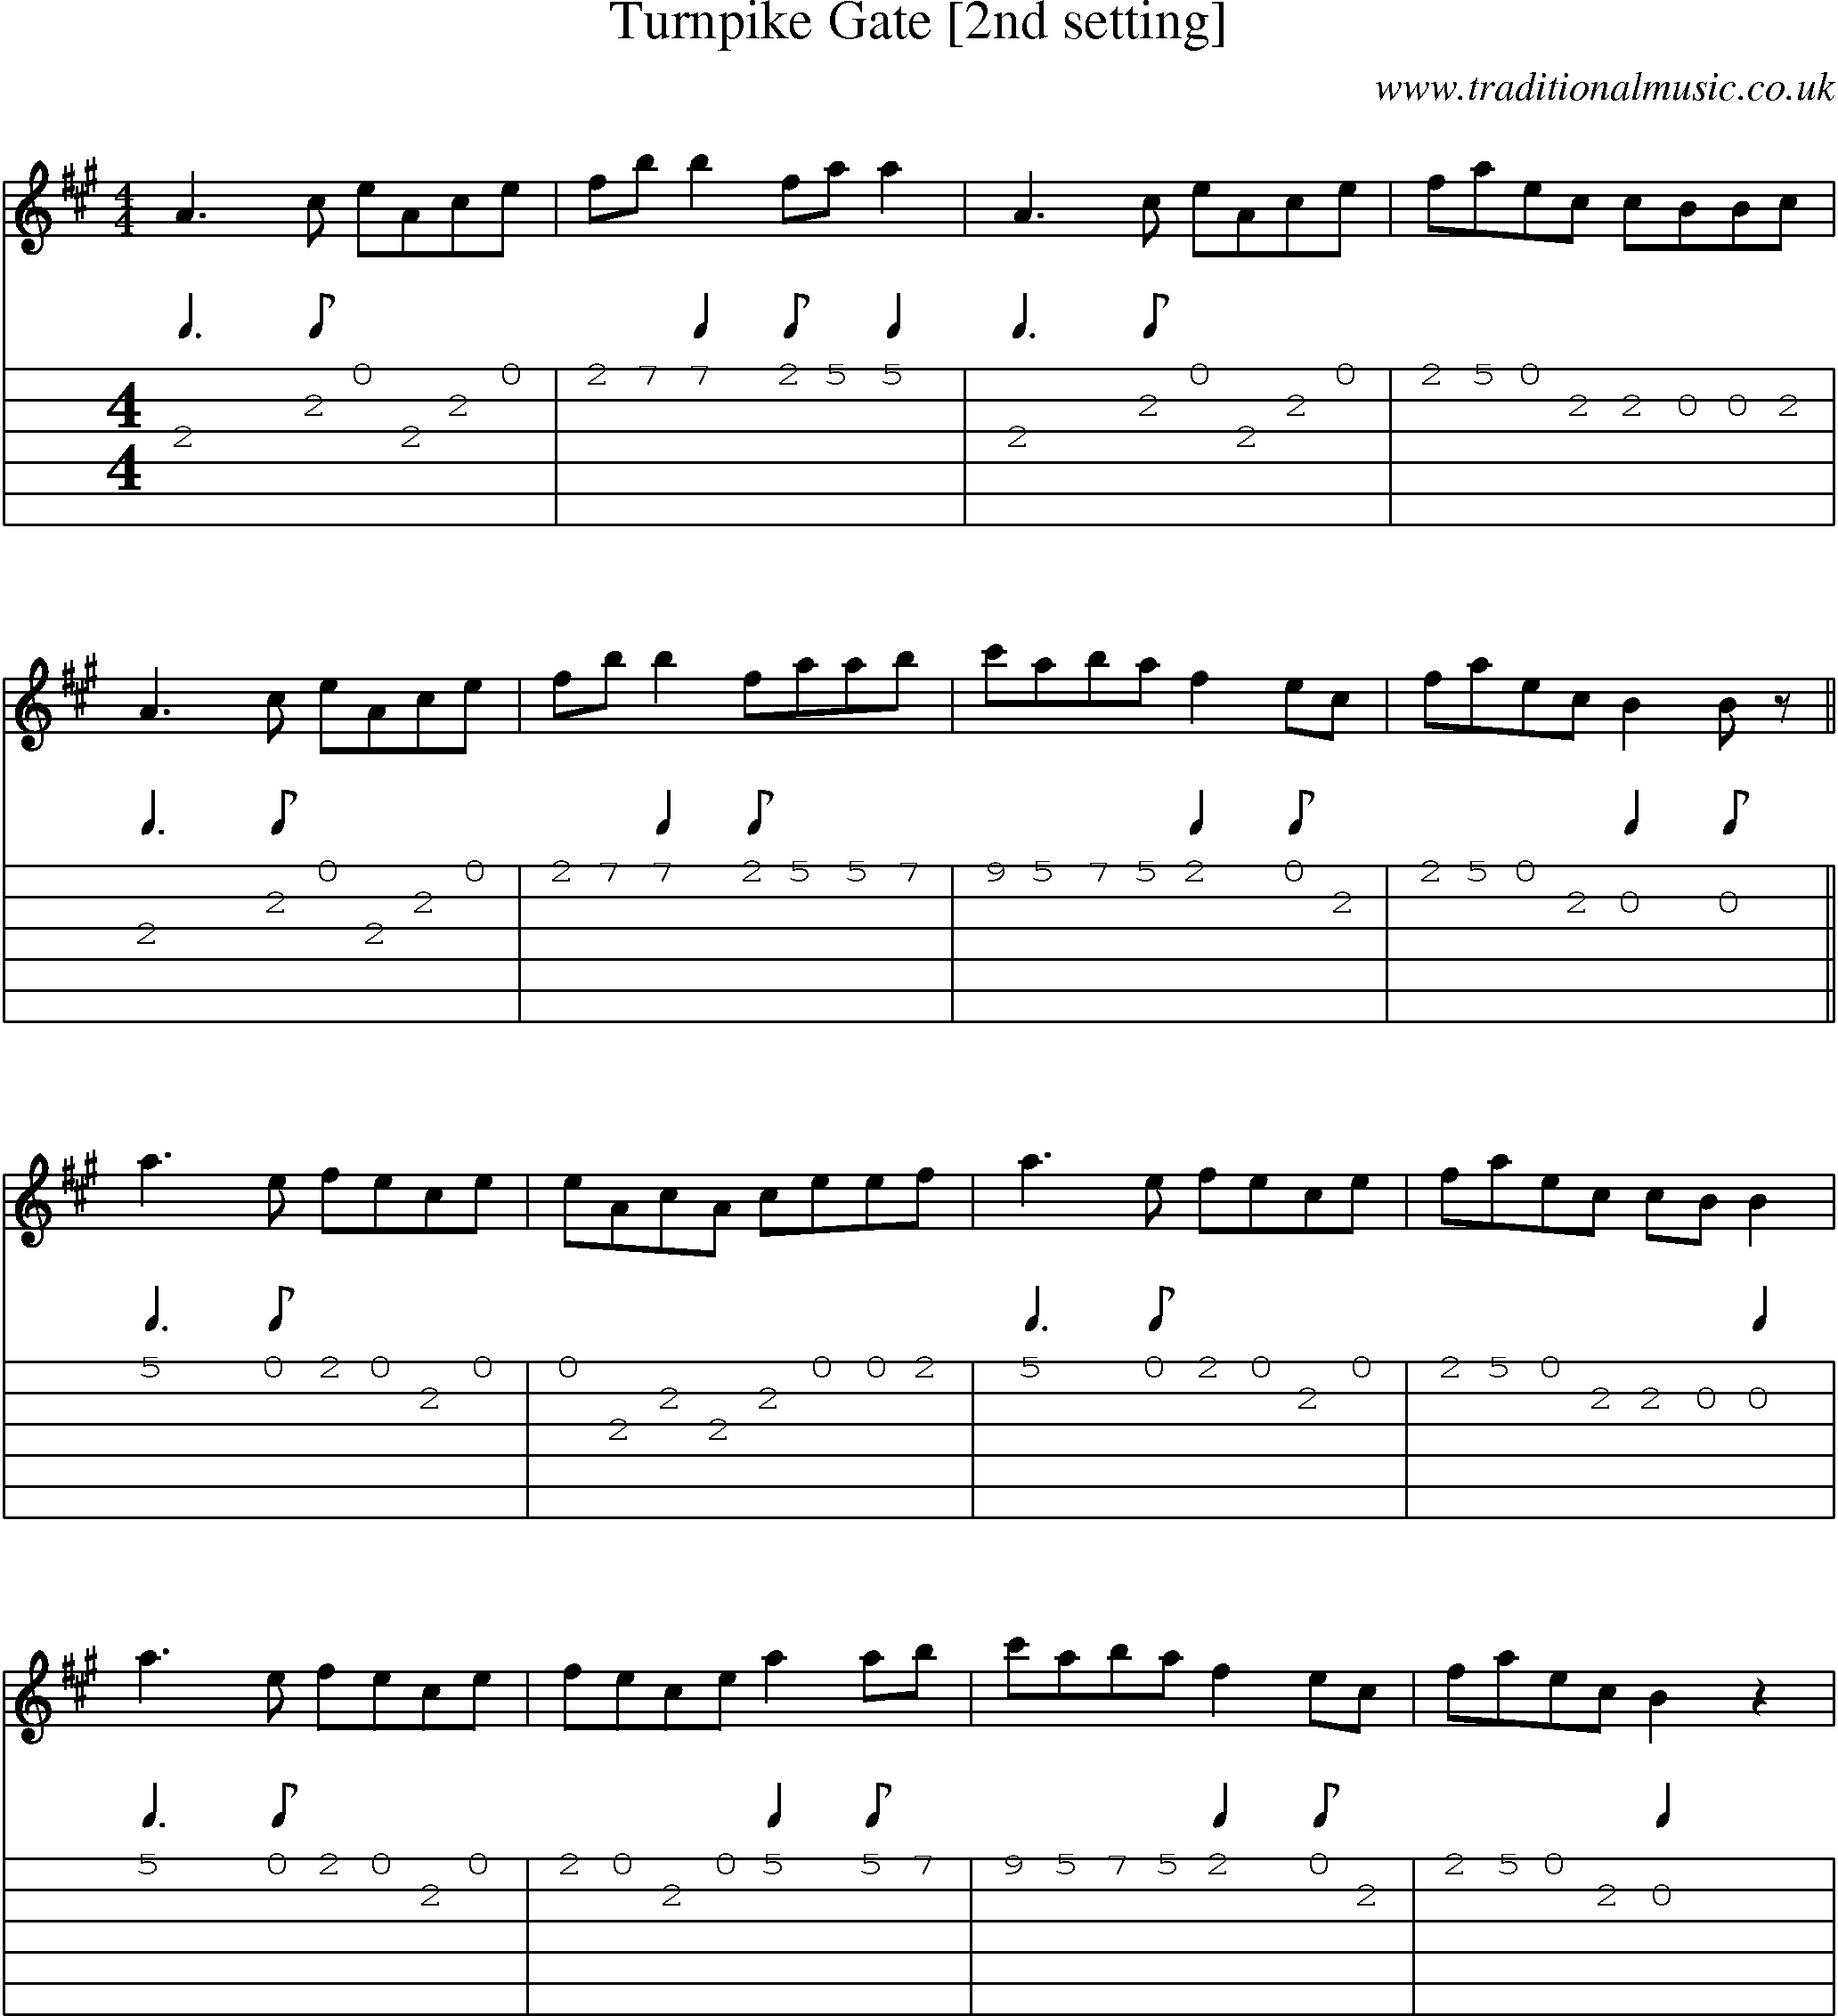 Music Score and Guitar Tabs for Turnpike Gate [2nd Setting]